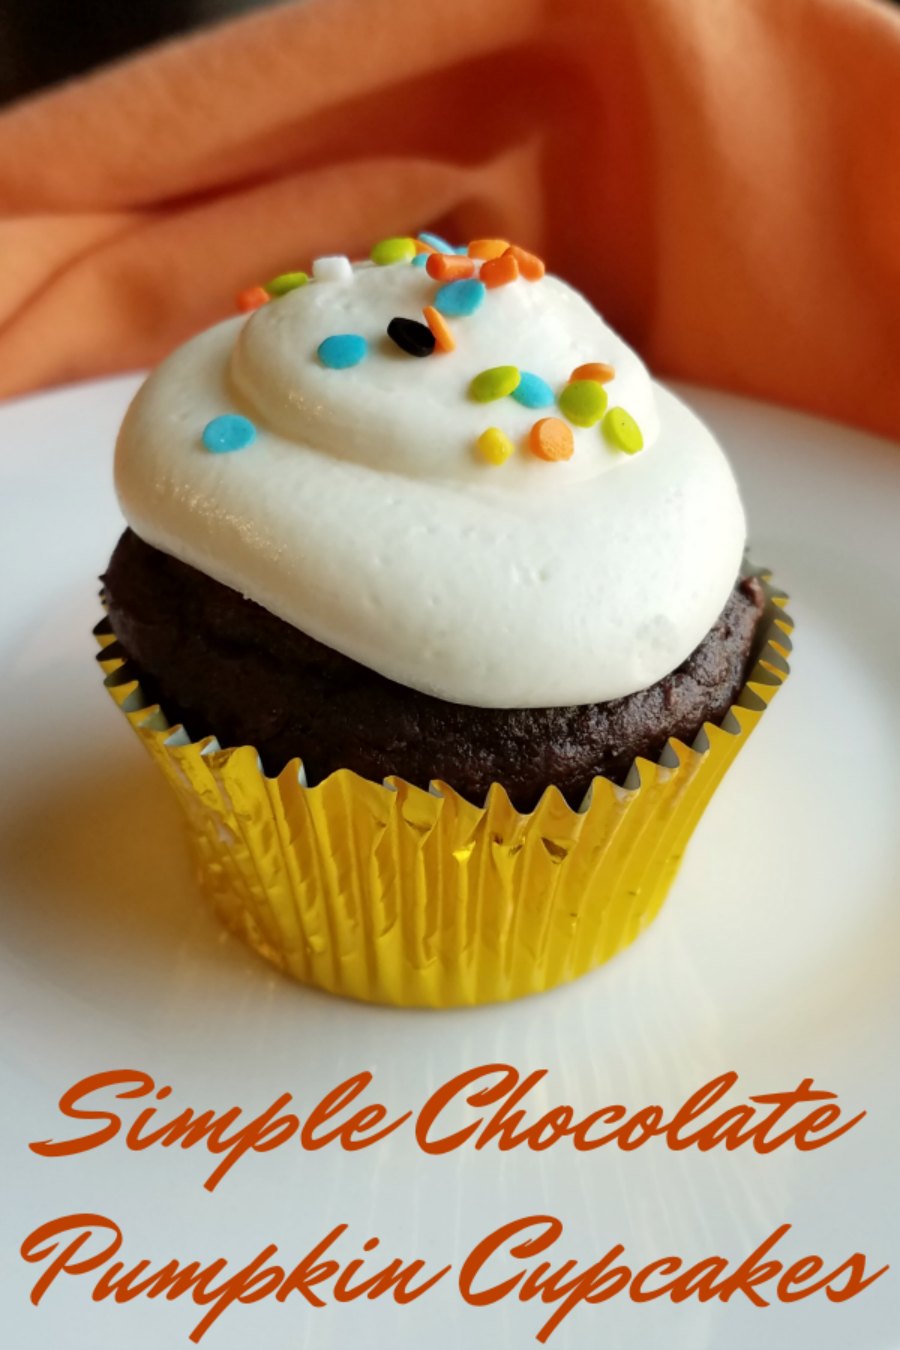 Super simple to make and full of flavor, the chocolate pumpkin cupcakes have something for everyone to love! Whip up a batch and make your favorite frosting and sink your teeth into a delicious bite of fall!